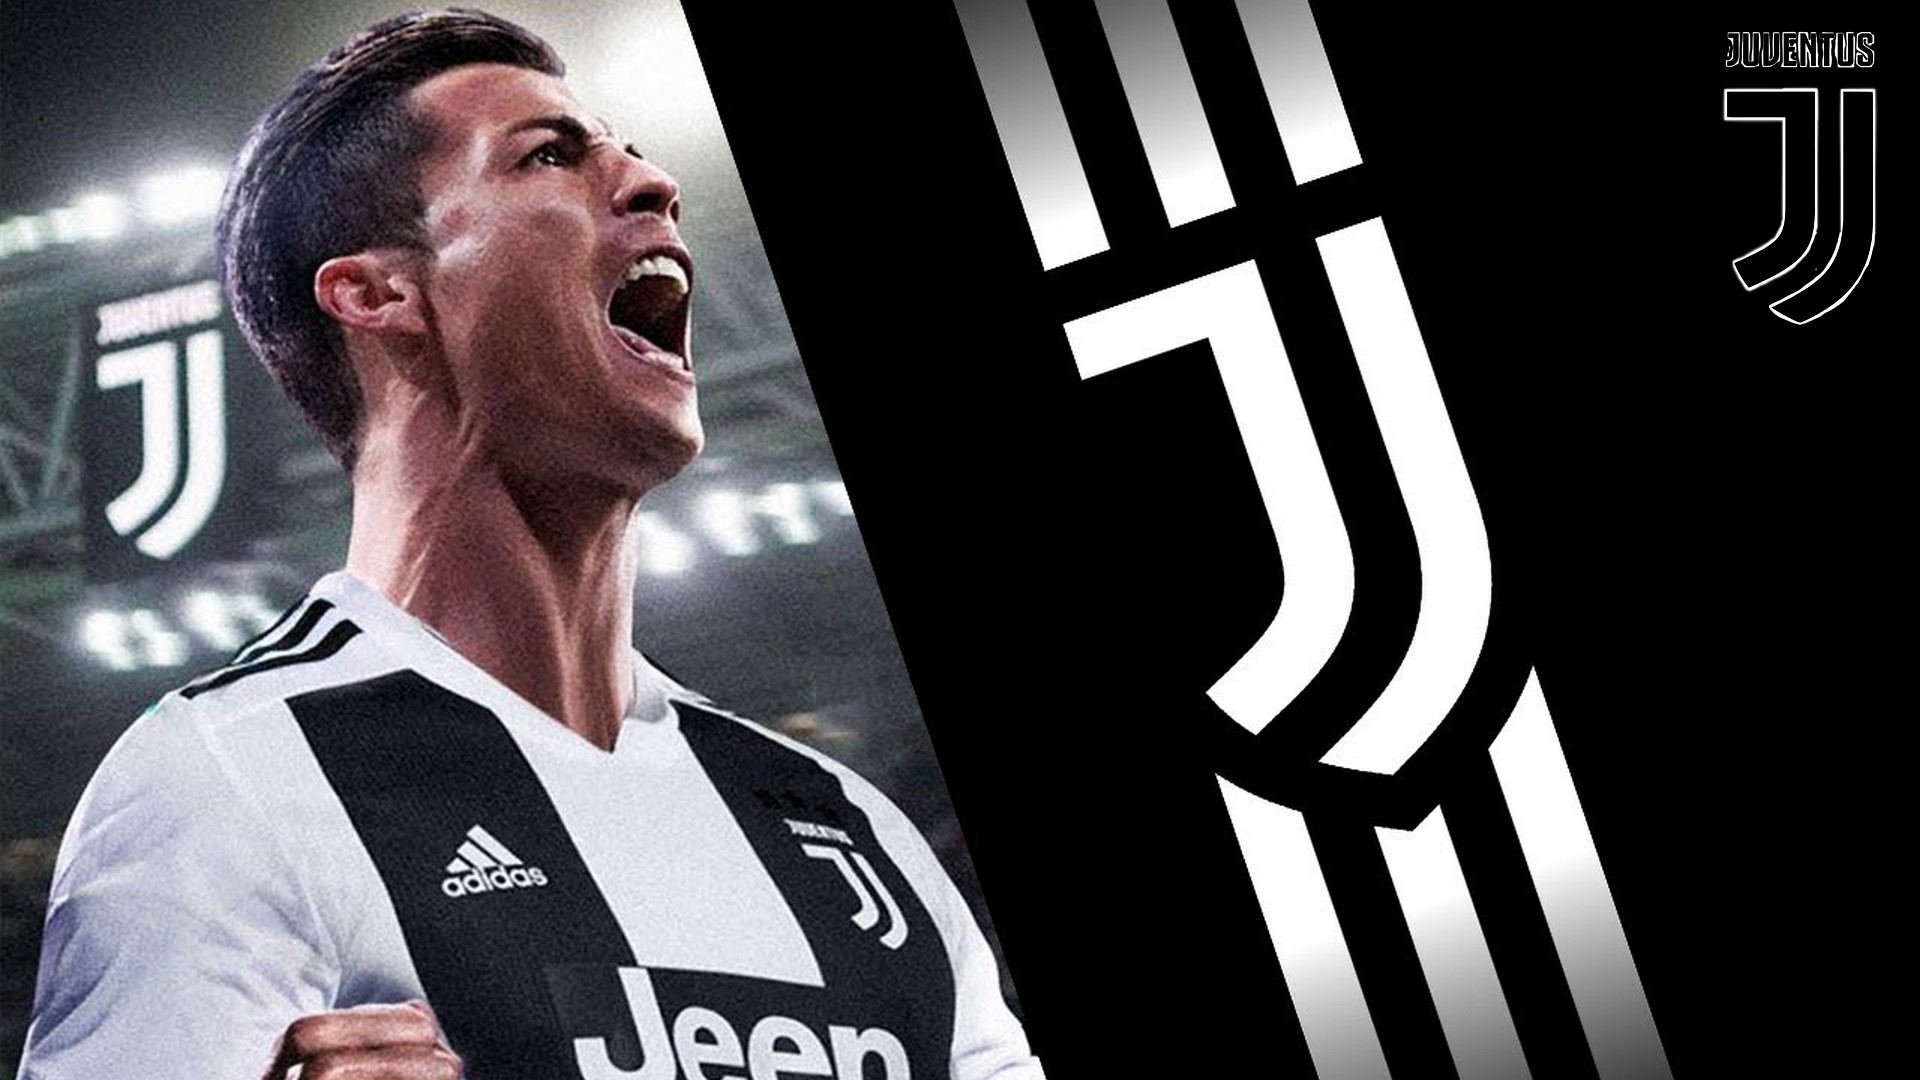 Cristiano Ronaldo Juve Wallpaper HD With Resolution 1920X1080 pixel. You can make this wallpaper for your Mac or Windows Desktop Background, iPhone, Android or Tablet and another Smartphone device for free